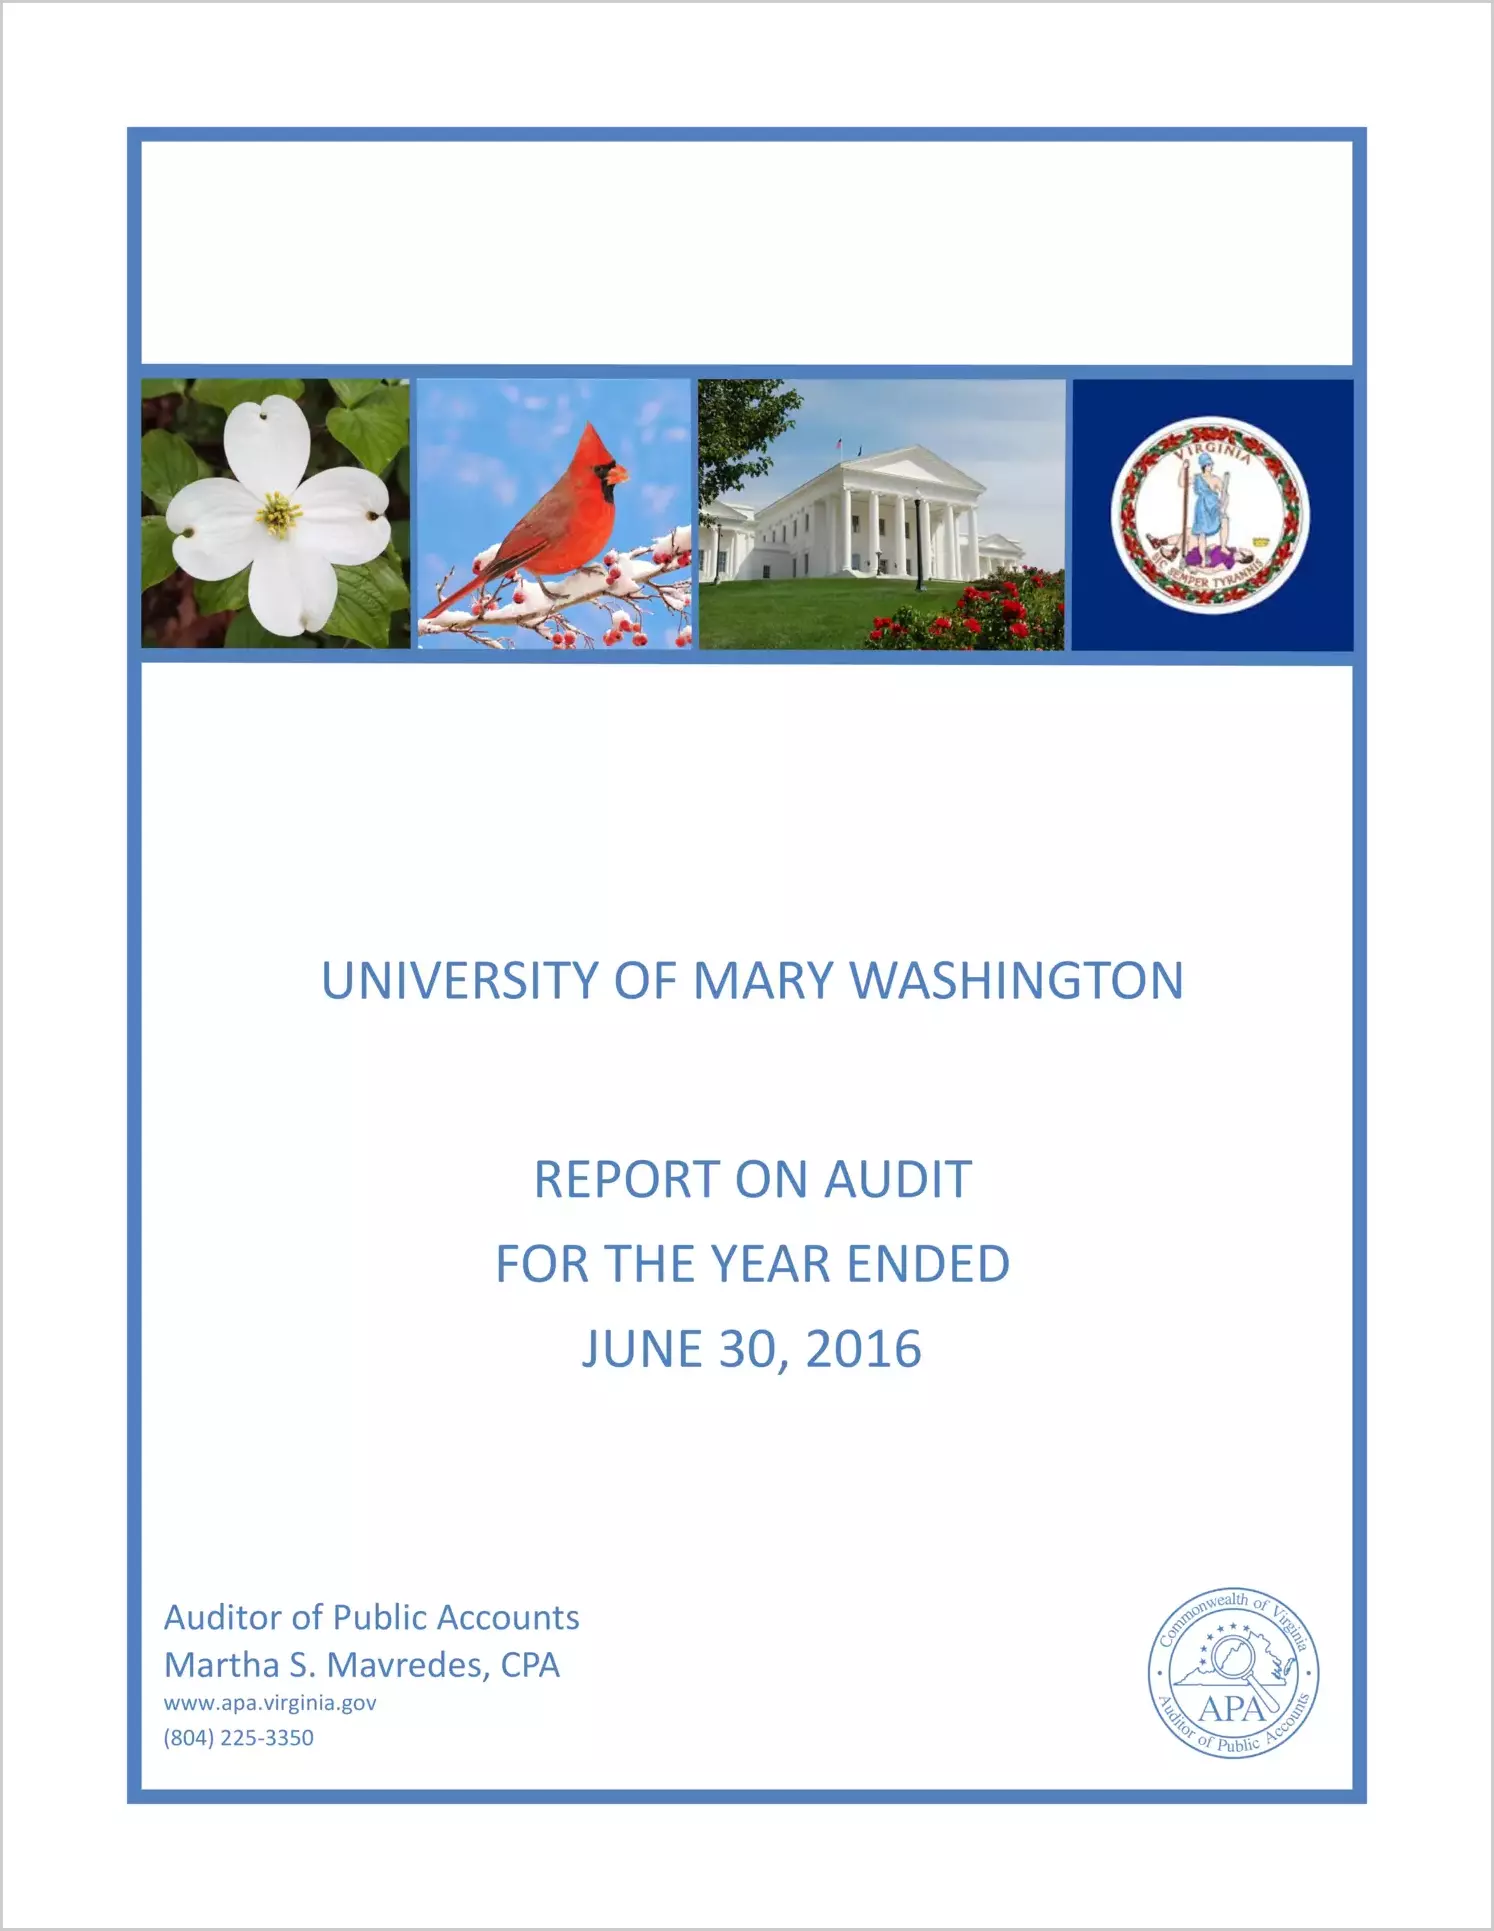 University of Mary Washington for the year ended June 30, 2016